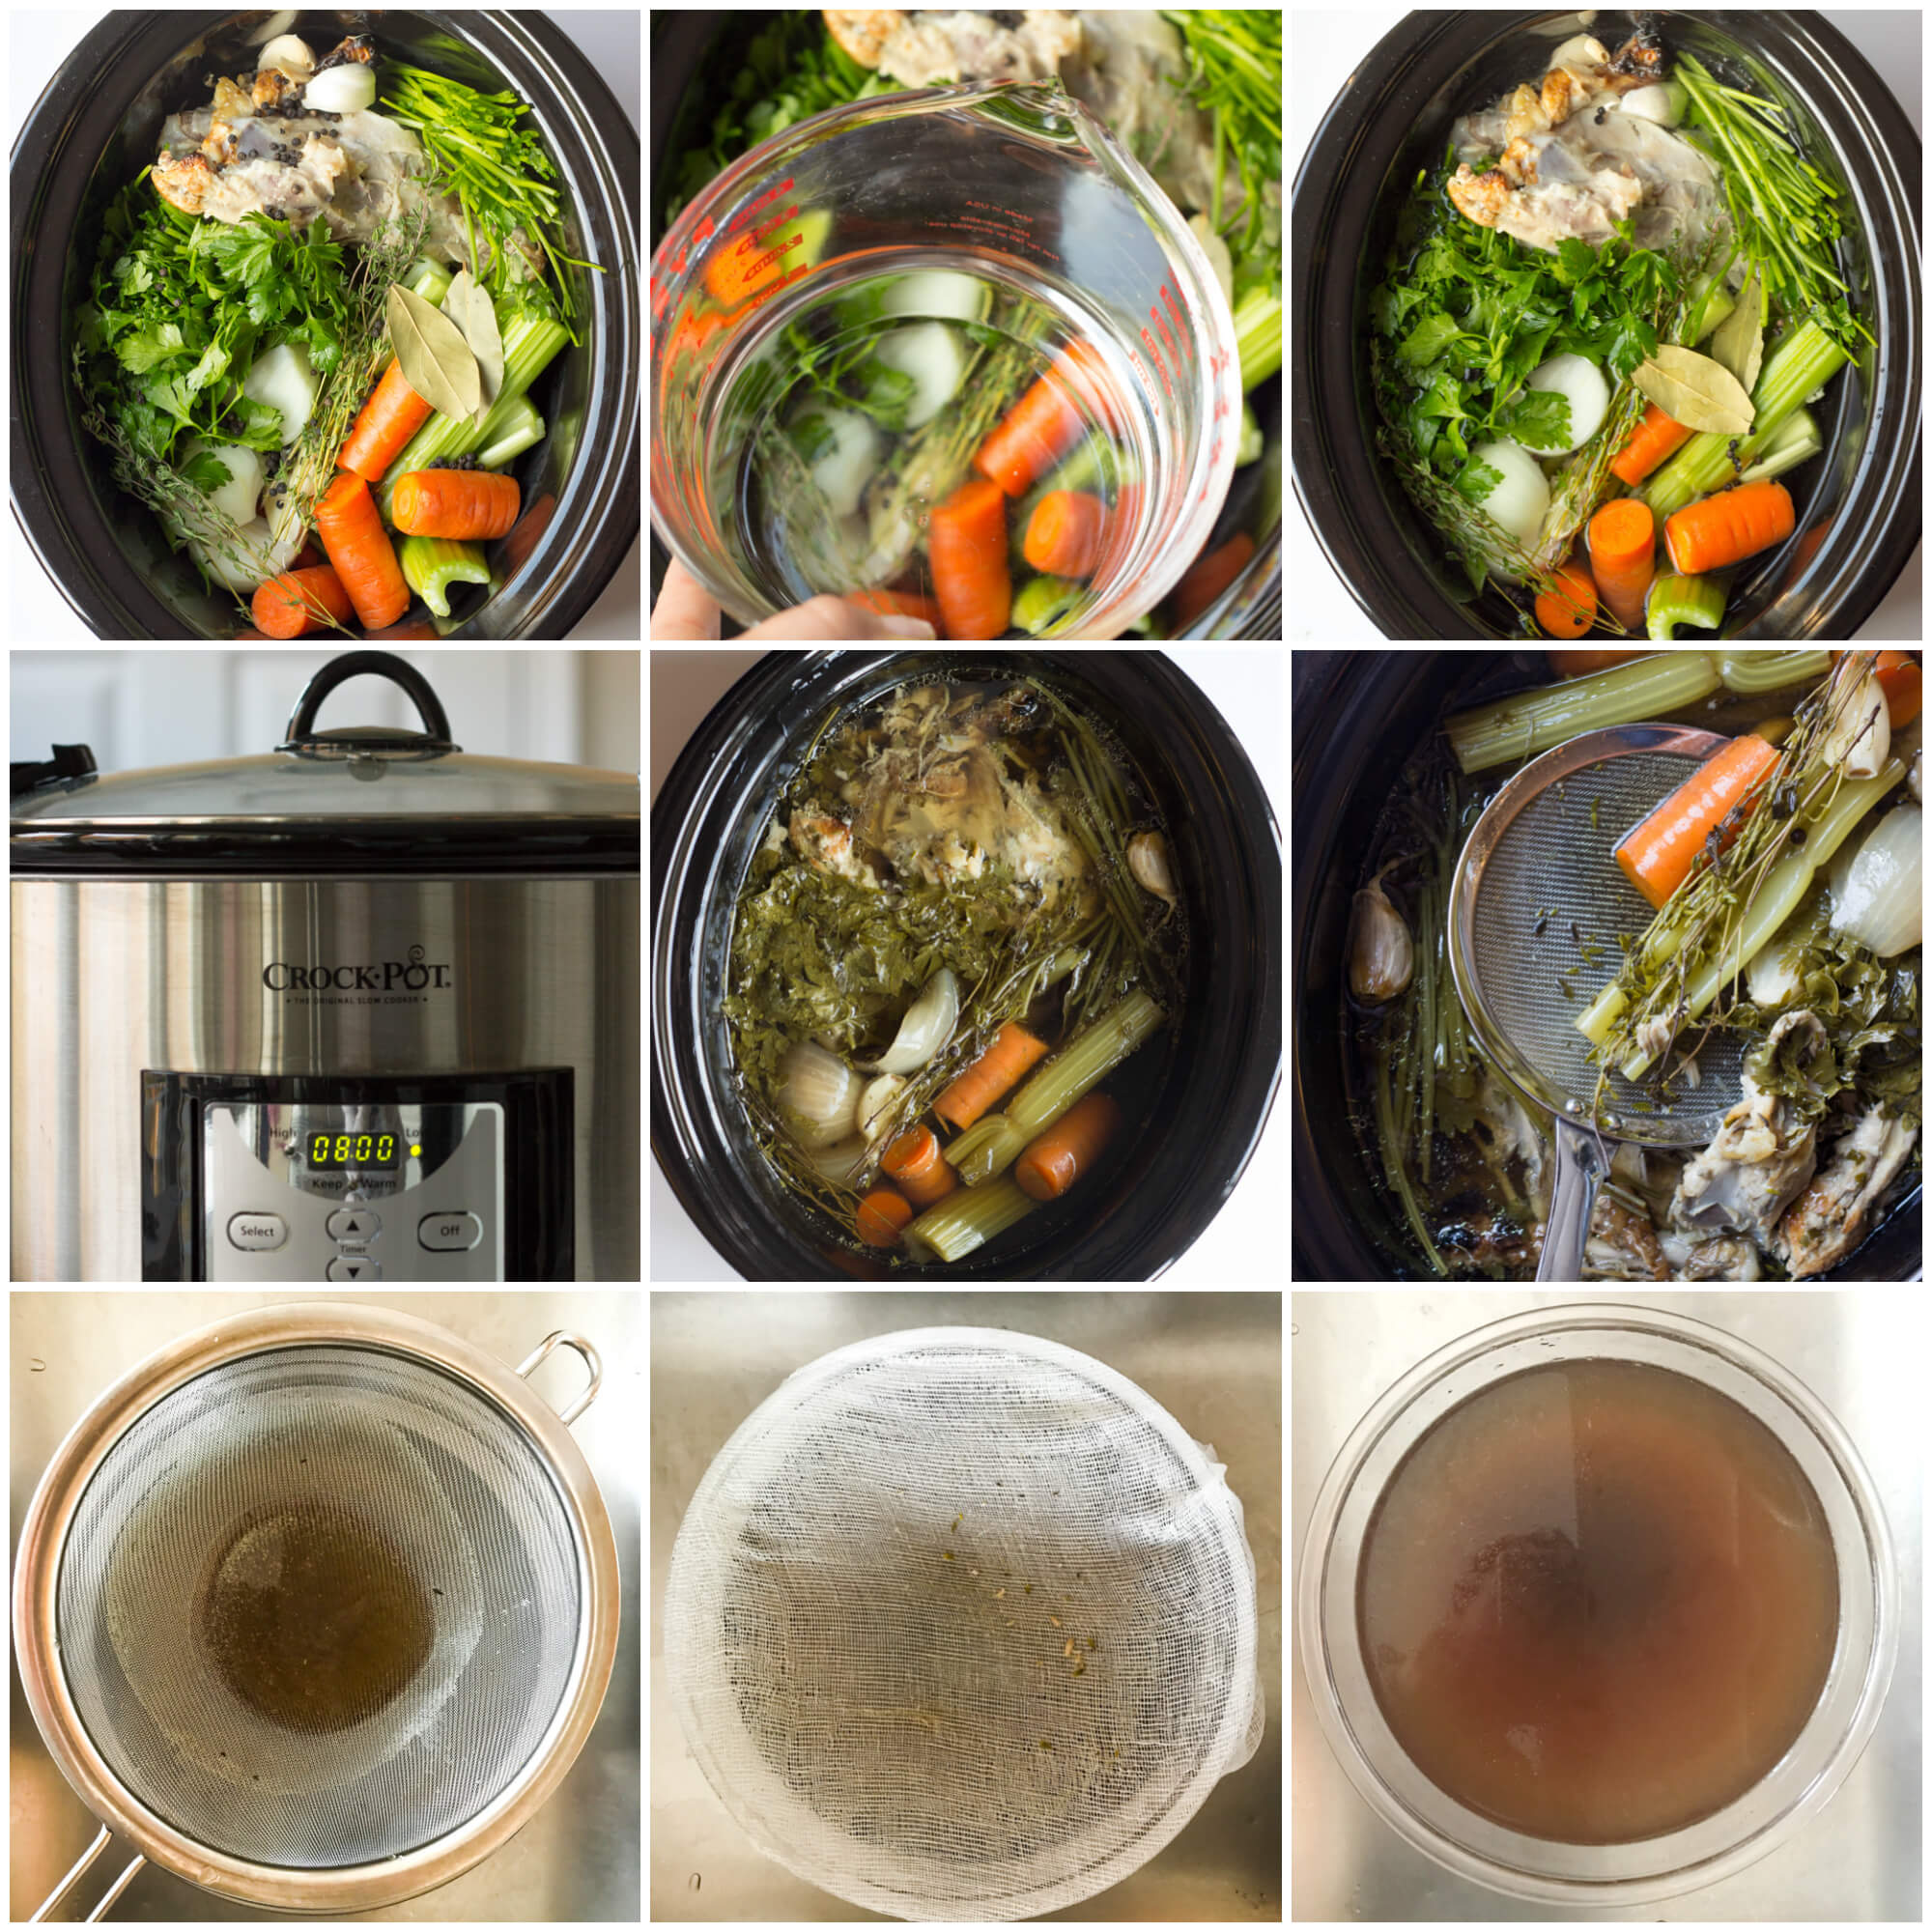 Easy Slow Cooker Chicken Stock - the easiest way to make homemade chicken stock! All you need is a slow cooker and rotisserie chicken | littlebroken @littlebroken